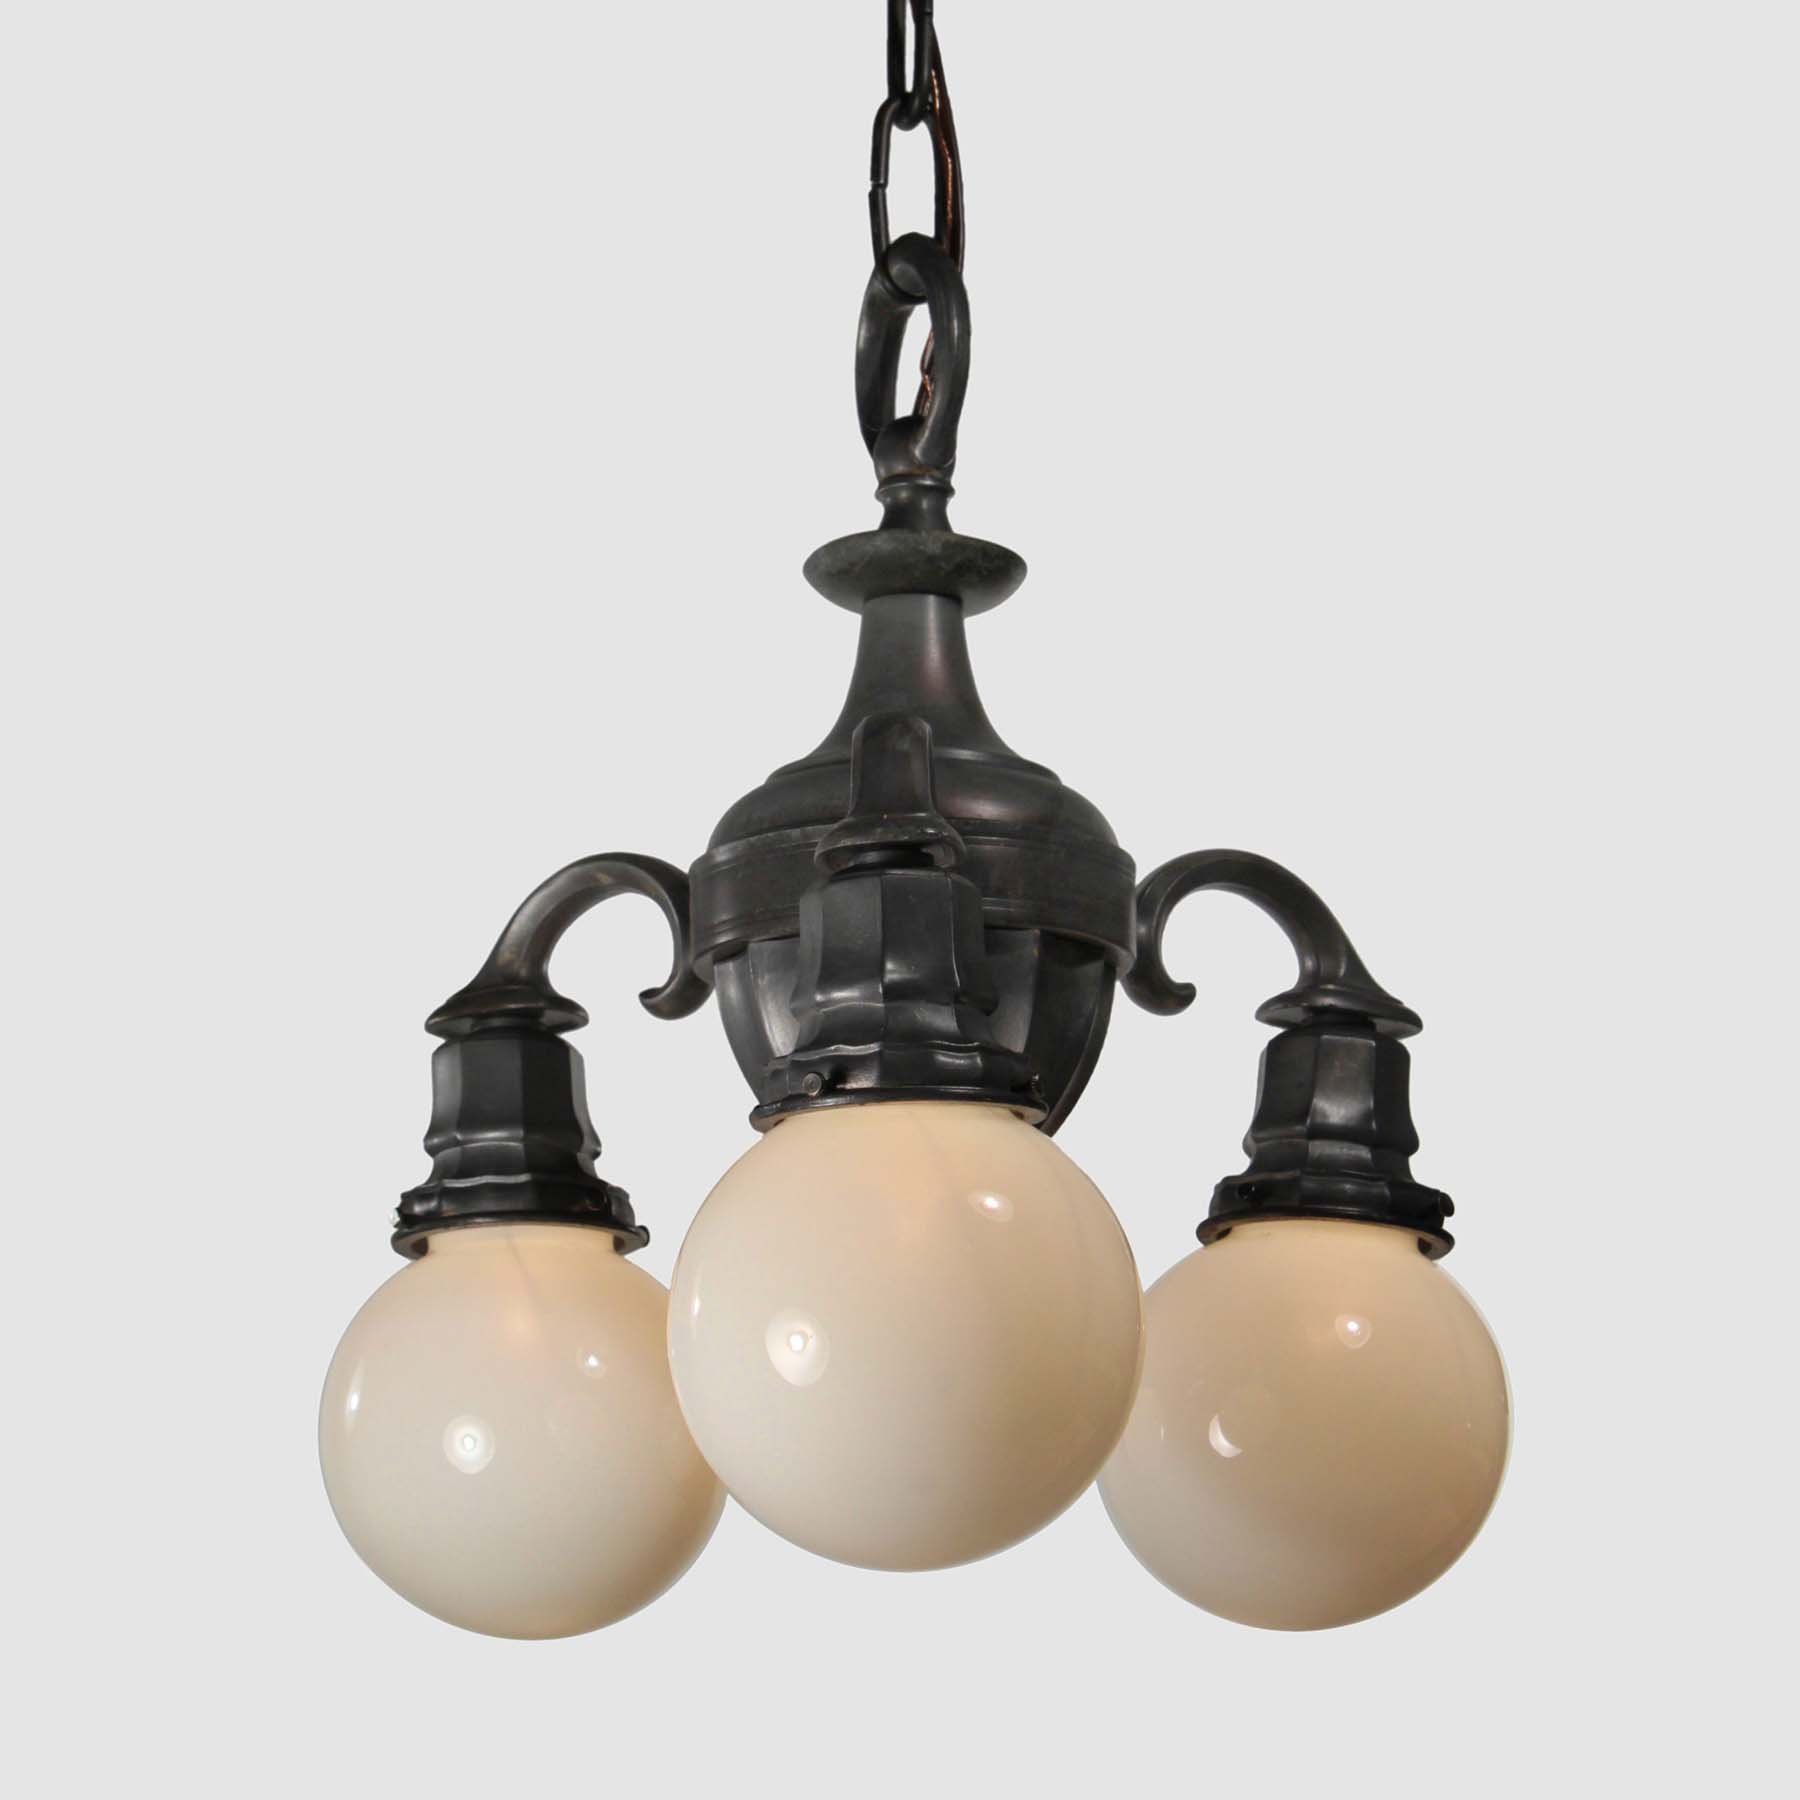 SOLD Chandelier with Glass Globes, Antique Lighting-67938